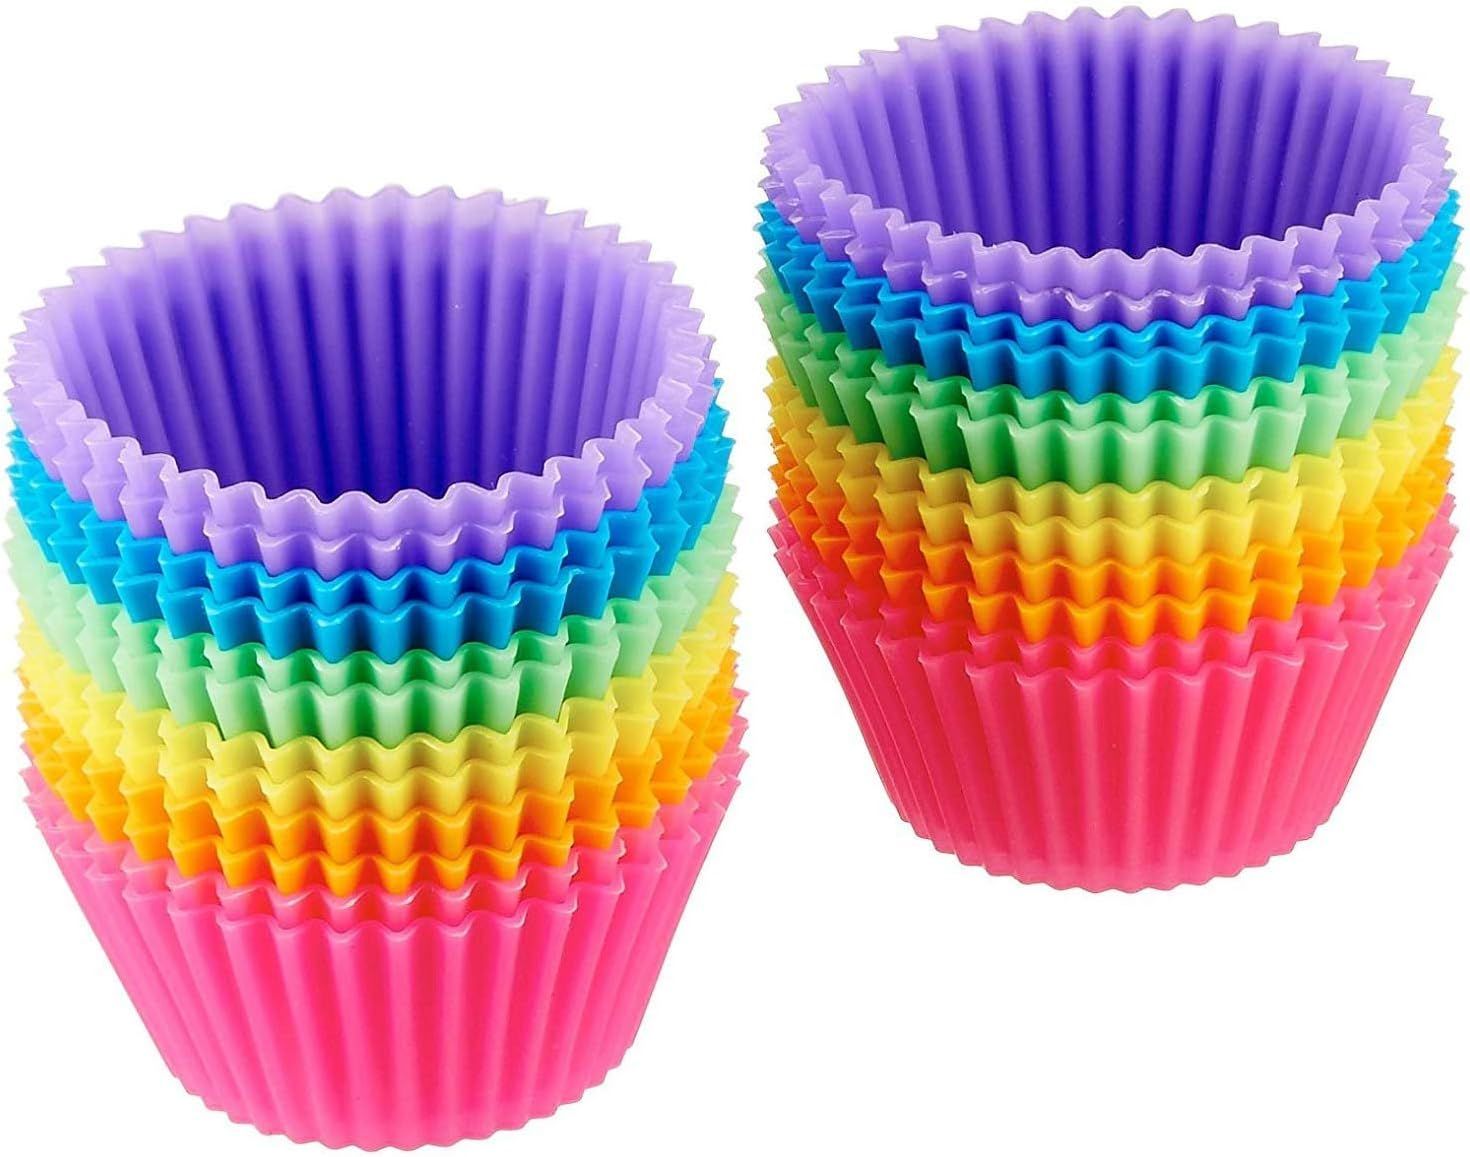 Amazon Basics Reusable Silicone Baking Cups, Muffin Liners, Pack of 24, Multicolor, 2.9" x 2.96" ... | Amazon (US)